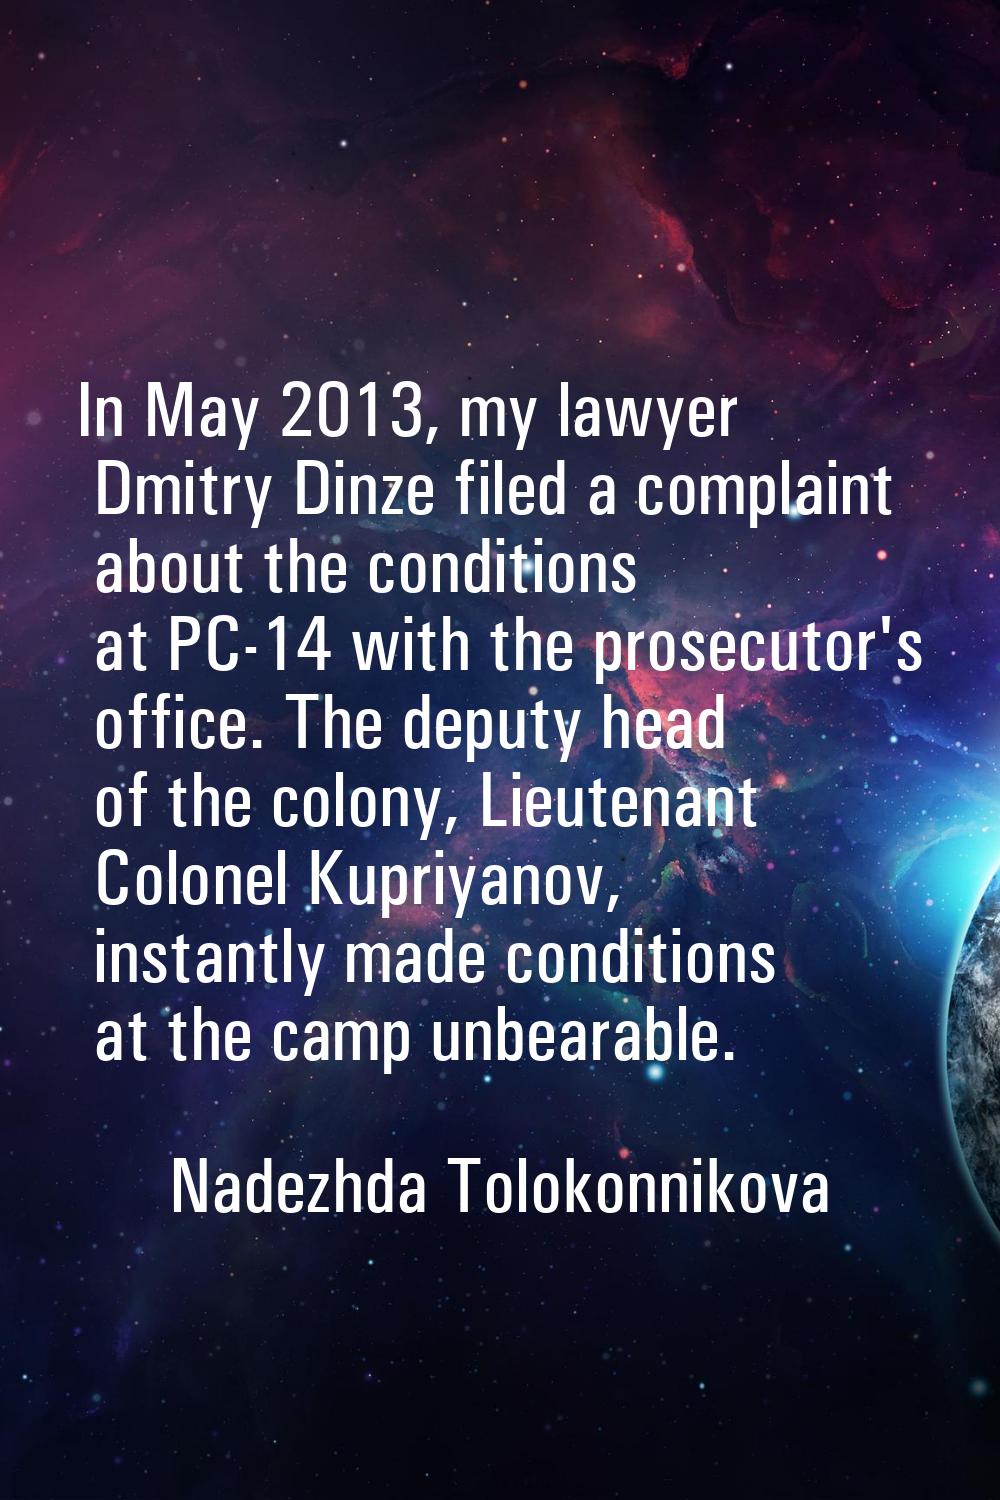 In May 2013, my lawyer Dmitry Dinze filed a complaint about the conditions at PC-14 with the prosec